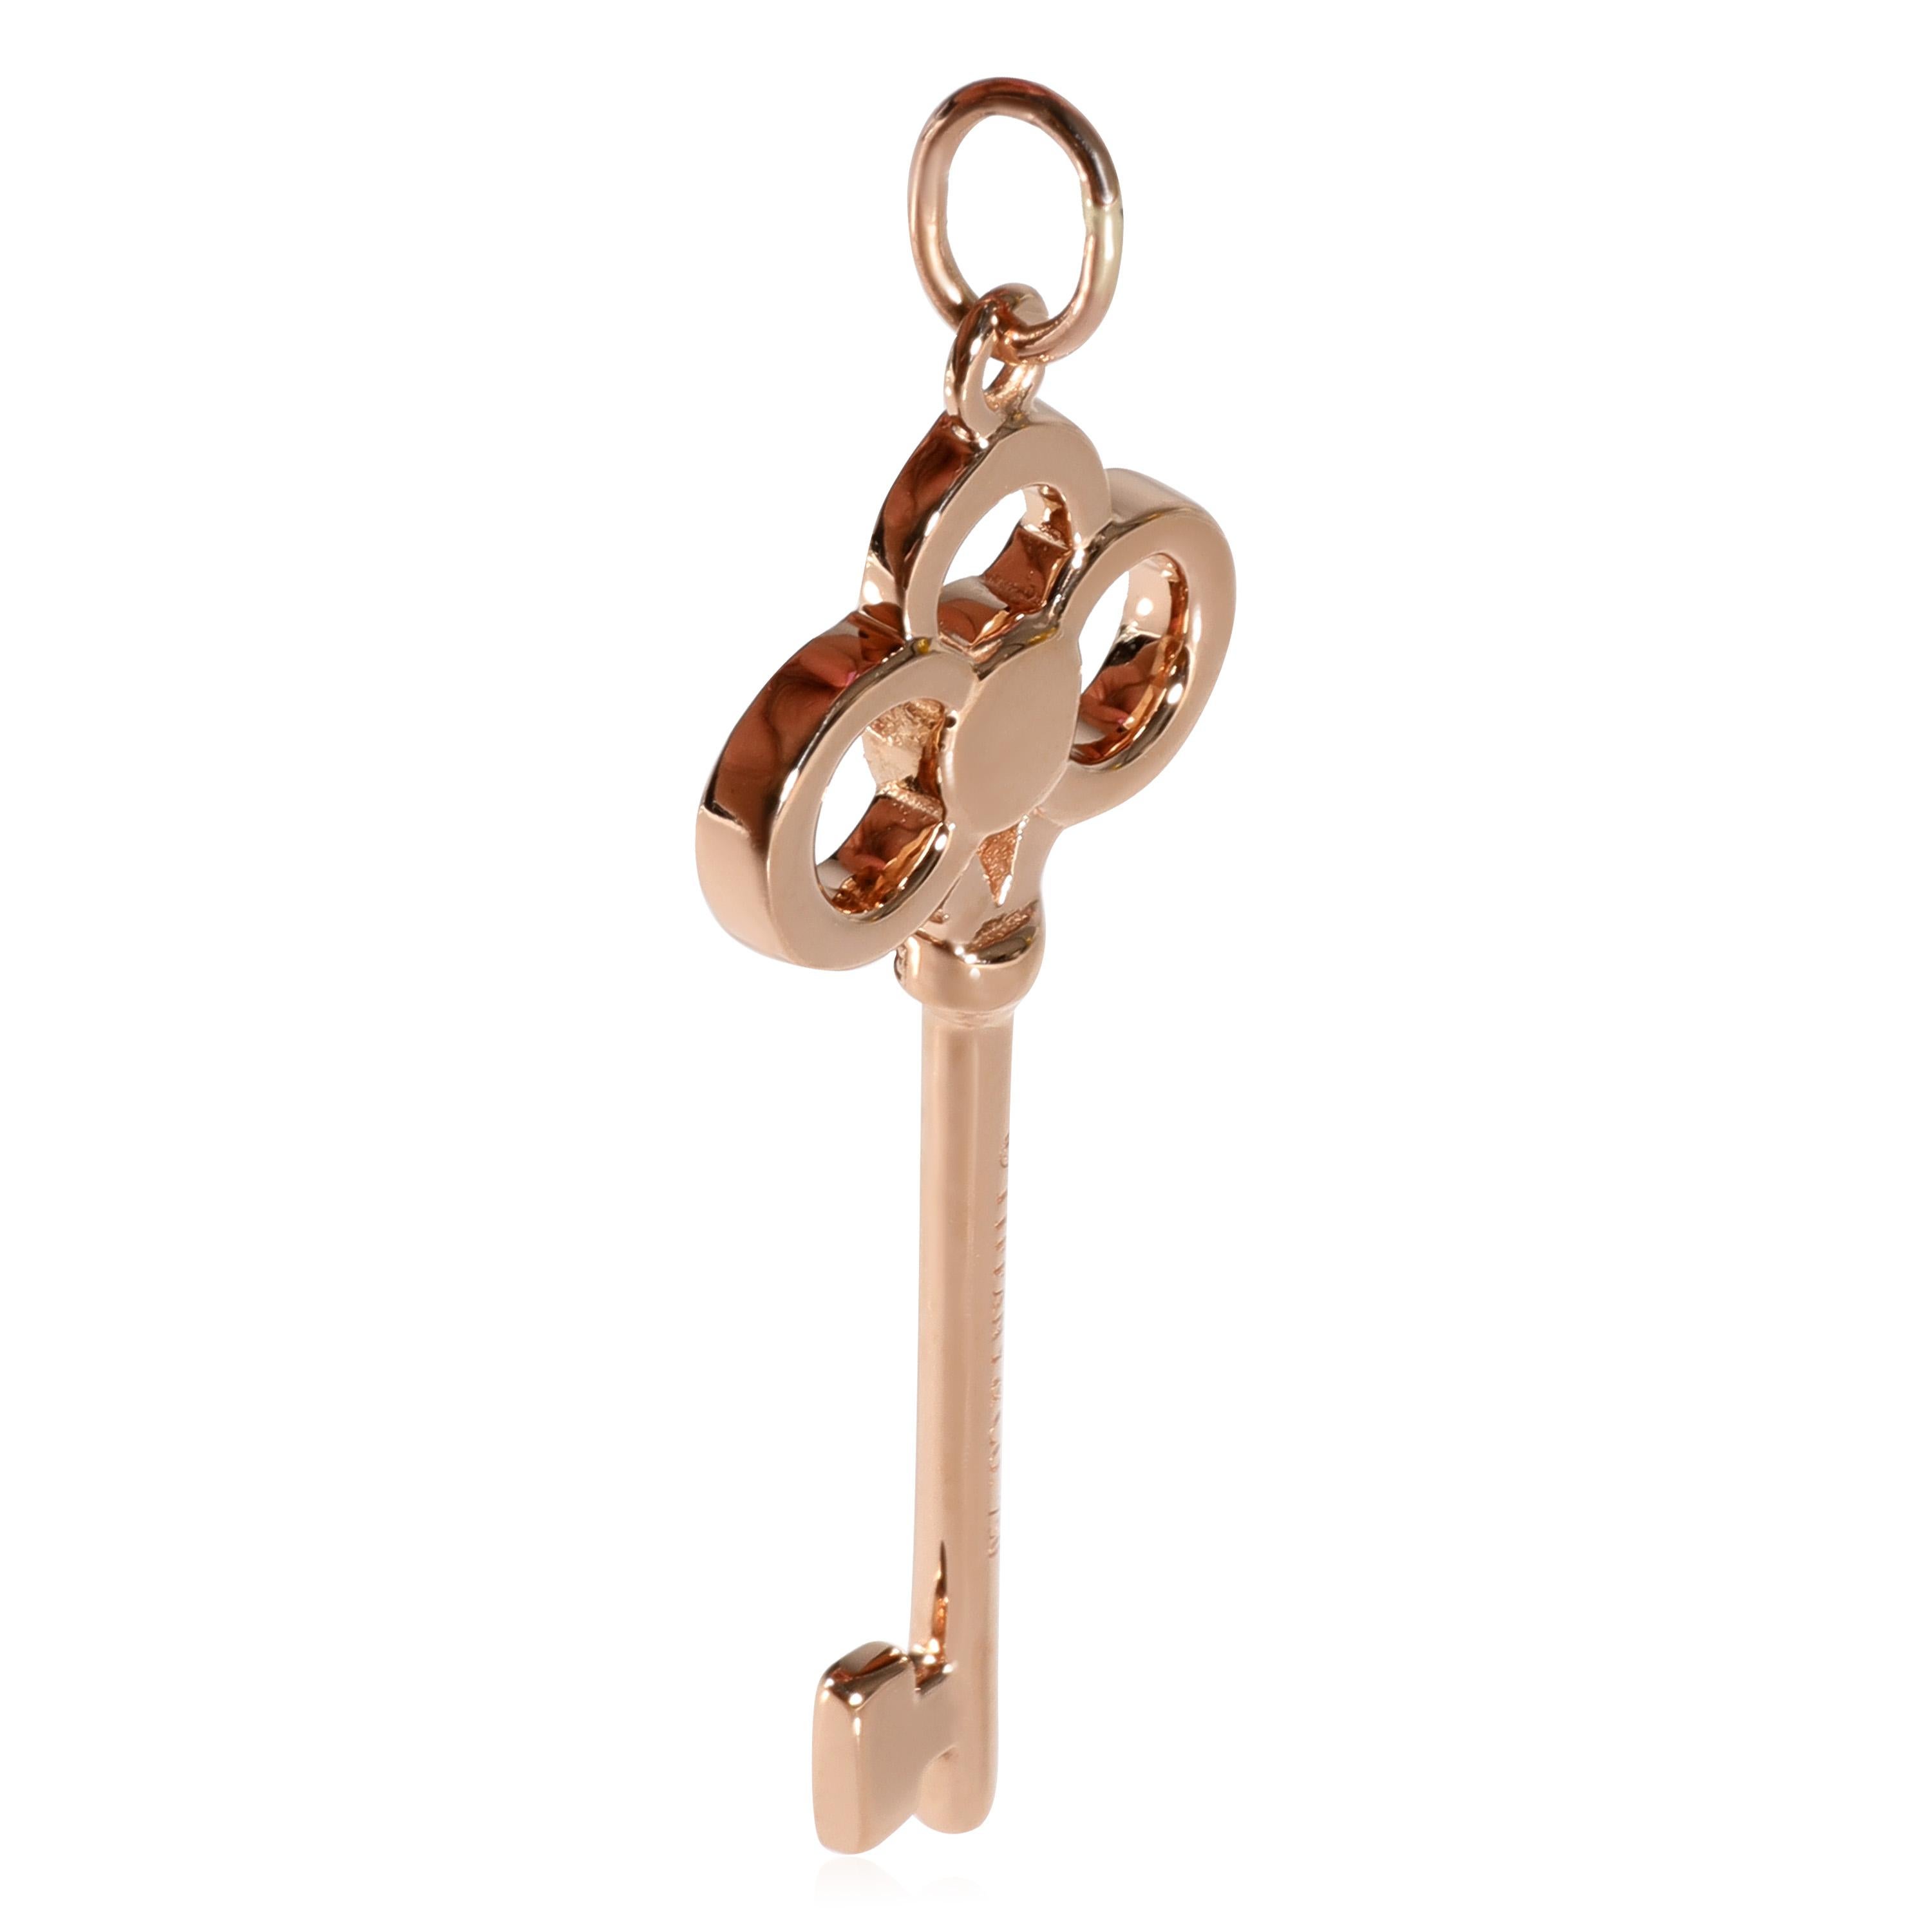 Tiffany & Co. Tiffany Keys Diamond Crown Pendant in 18k Rose Gold 0.11 CTW

PRIMARY DETAILS
SKU: 122031
Listing Title: Tiffany & Co. Tiffany Keys Diamond Crown Pendant in 18k Rose Gold 0.11 CTW
Condition Description: Retails for 3650 USD. In